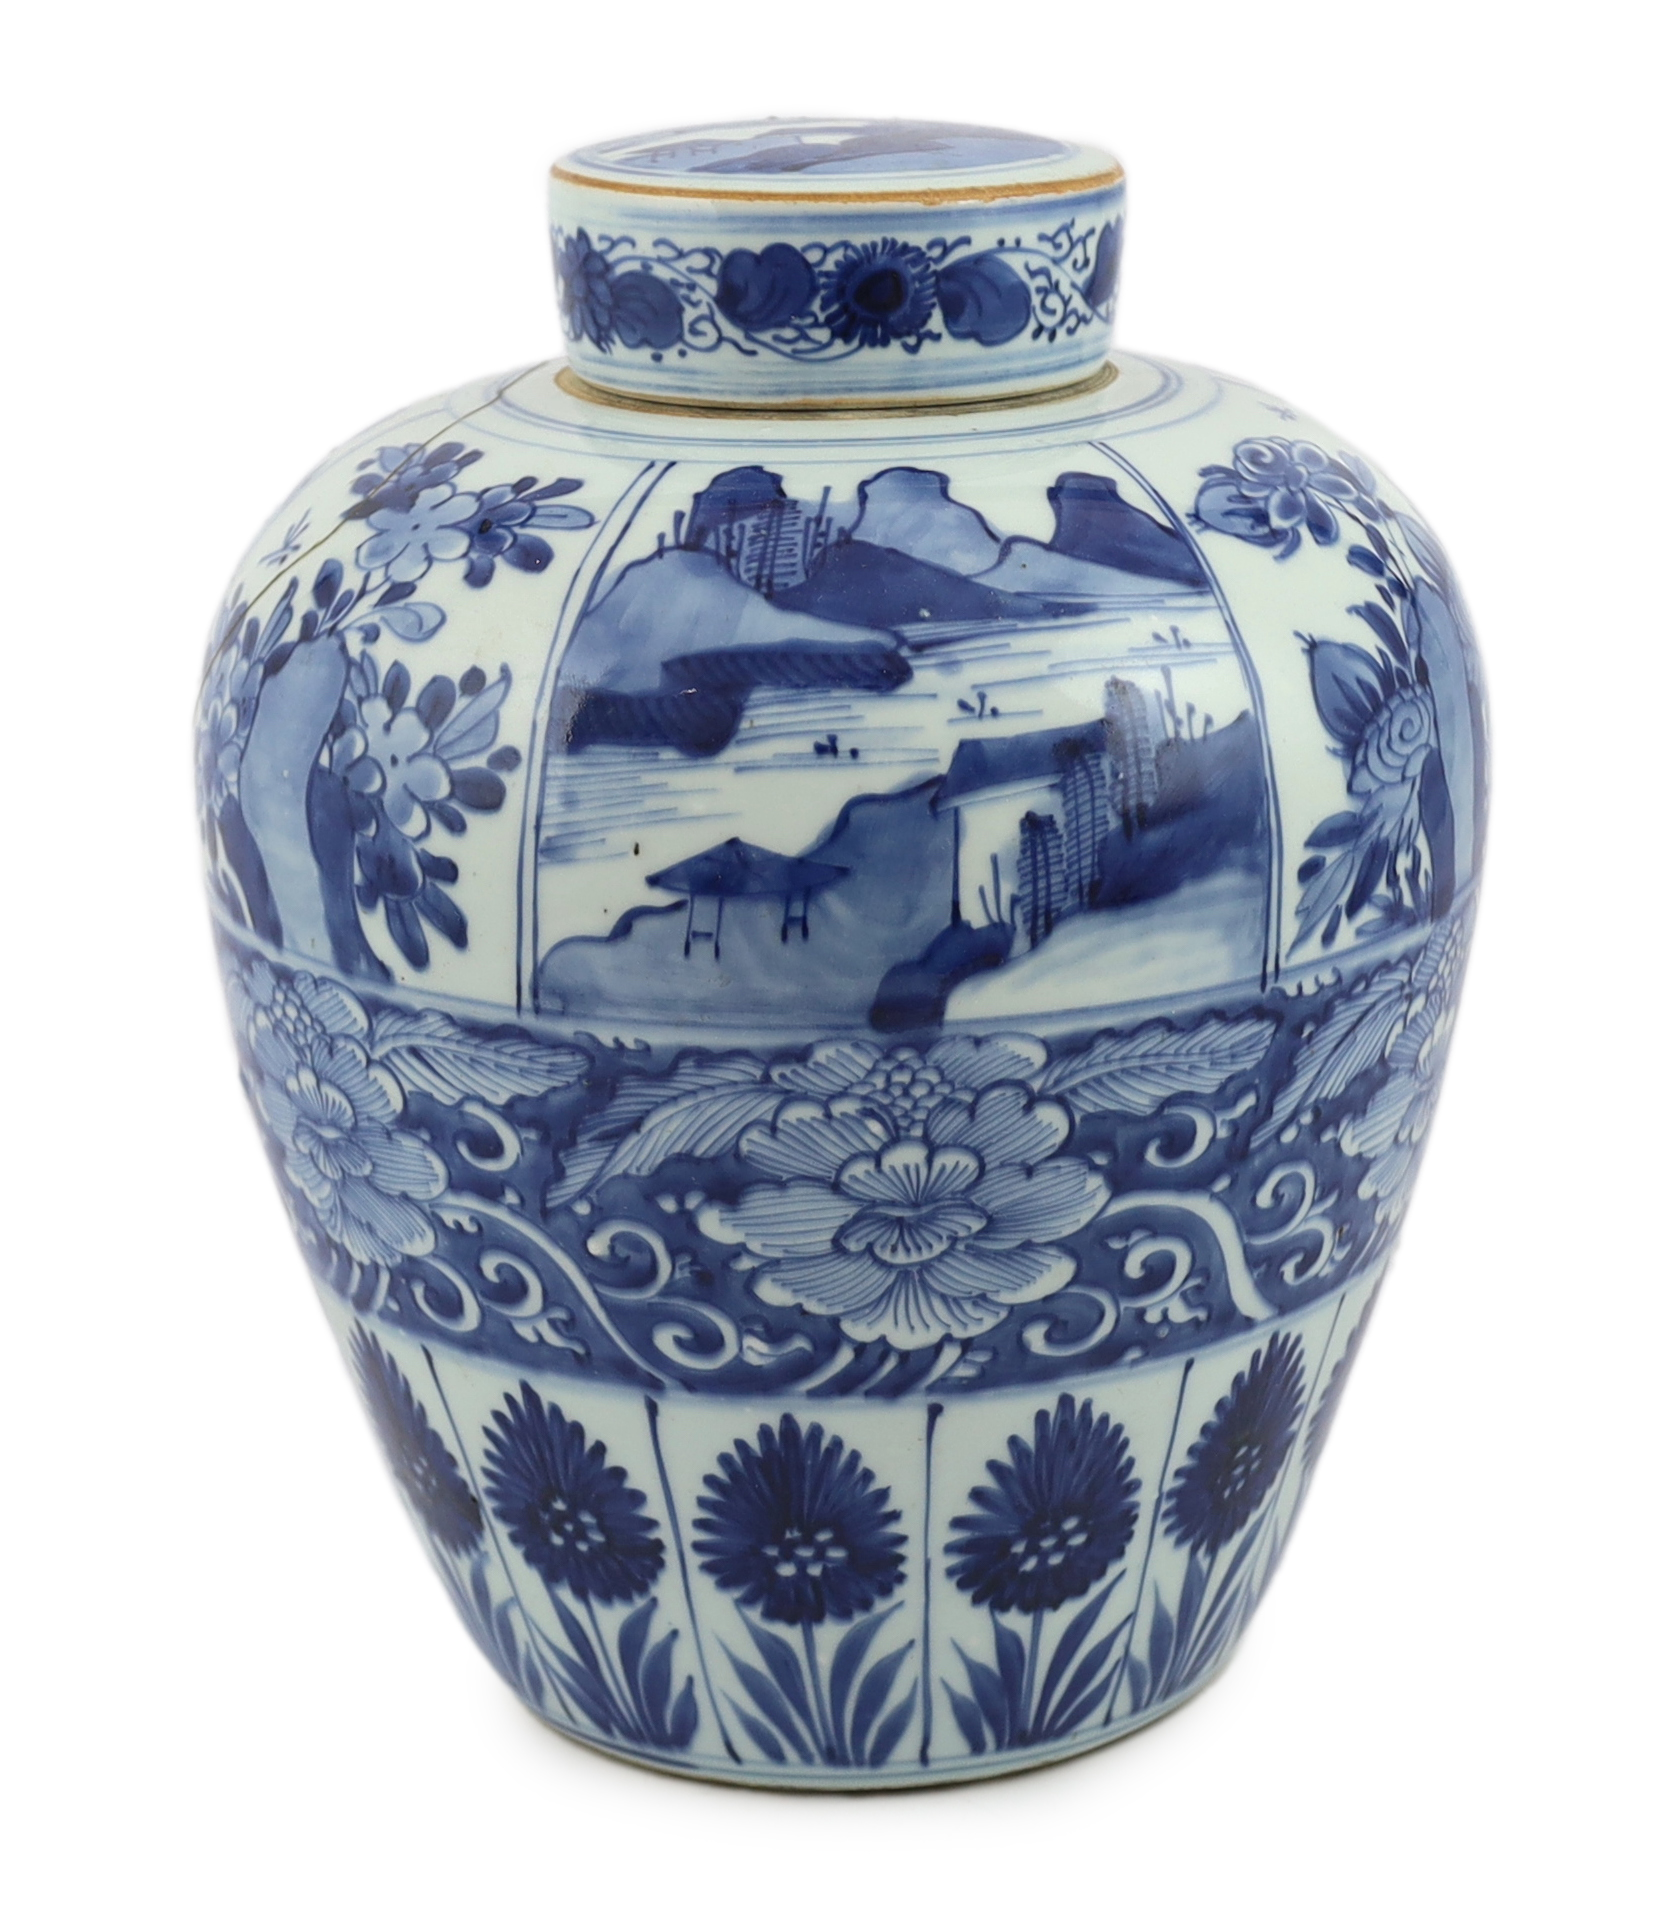 A Chinese blue and white ovoid jar and cover, Kangxi period, broken with kintsugi repair                                                                                                                                    